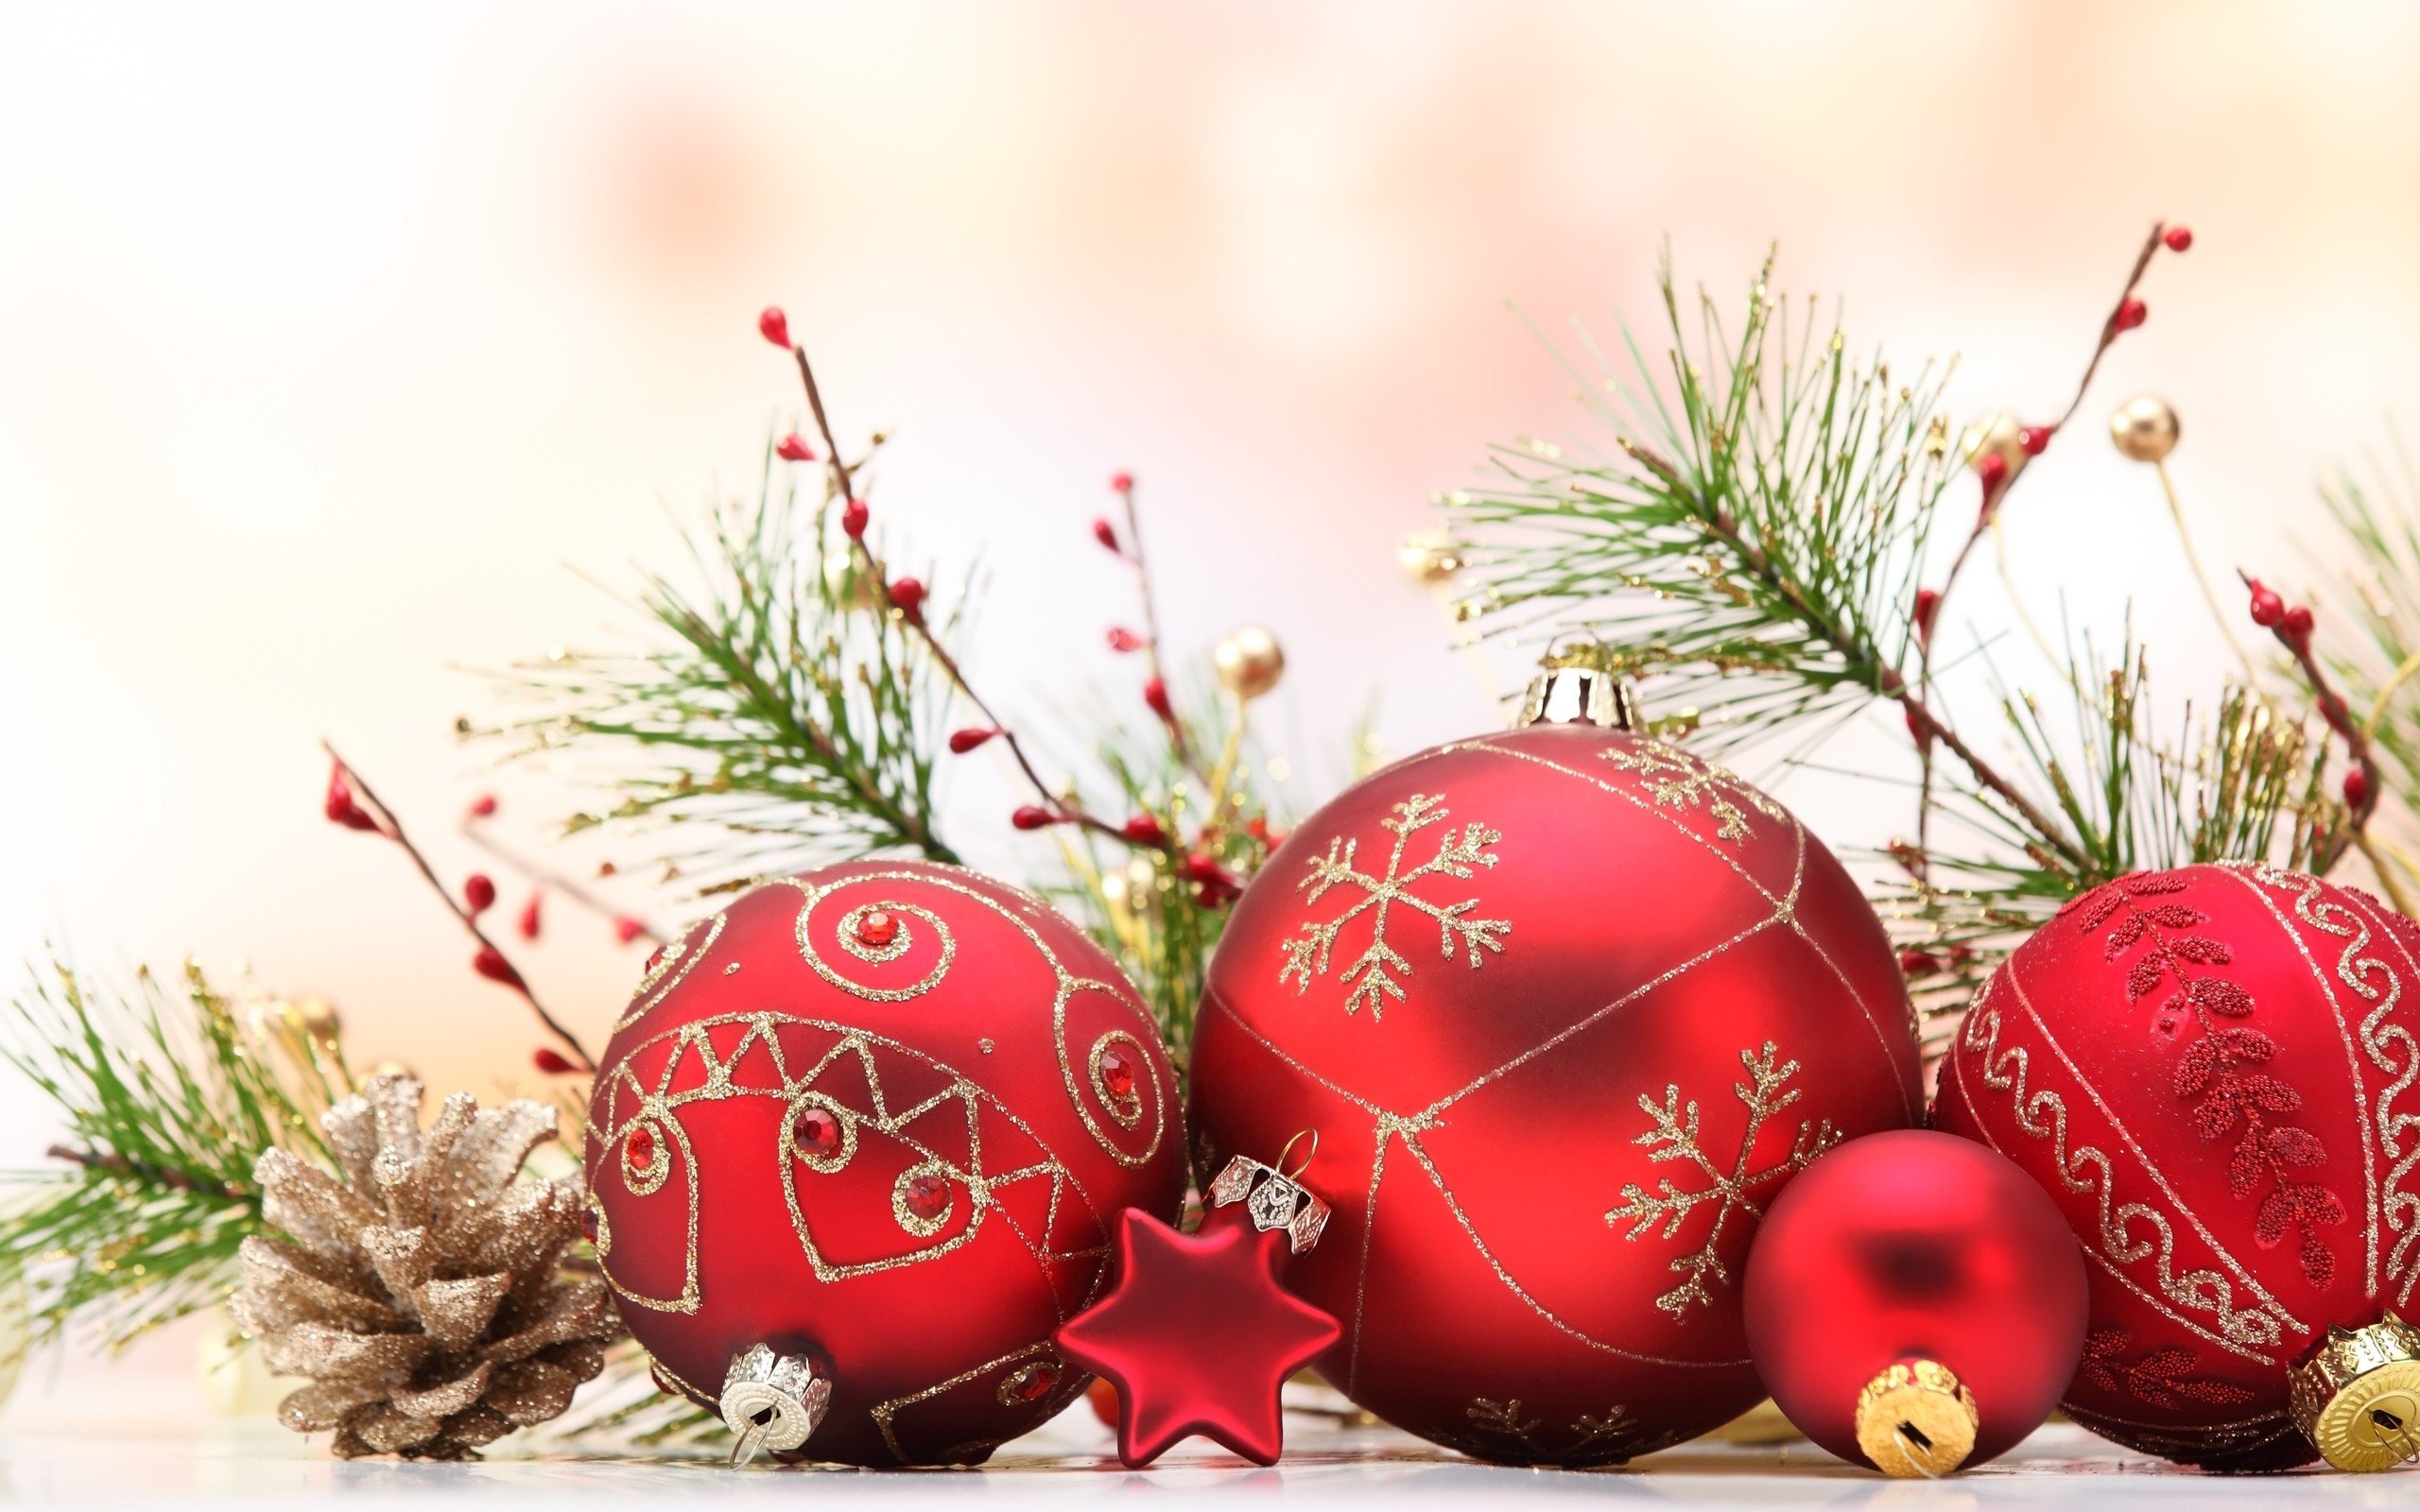 New Year, Snow, Christmas ornaments, Cones, Decorations Wallpaper